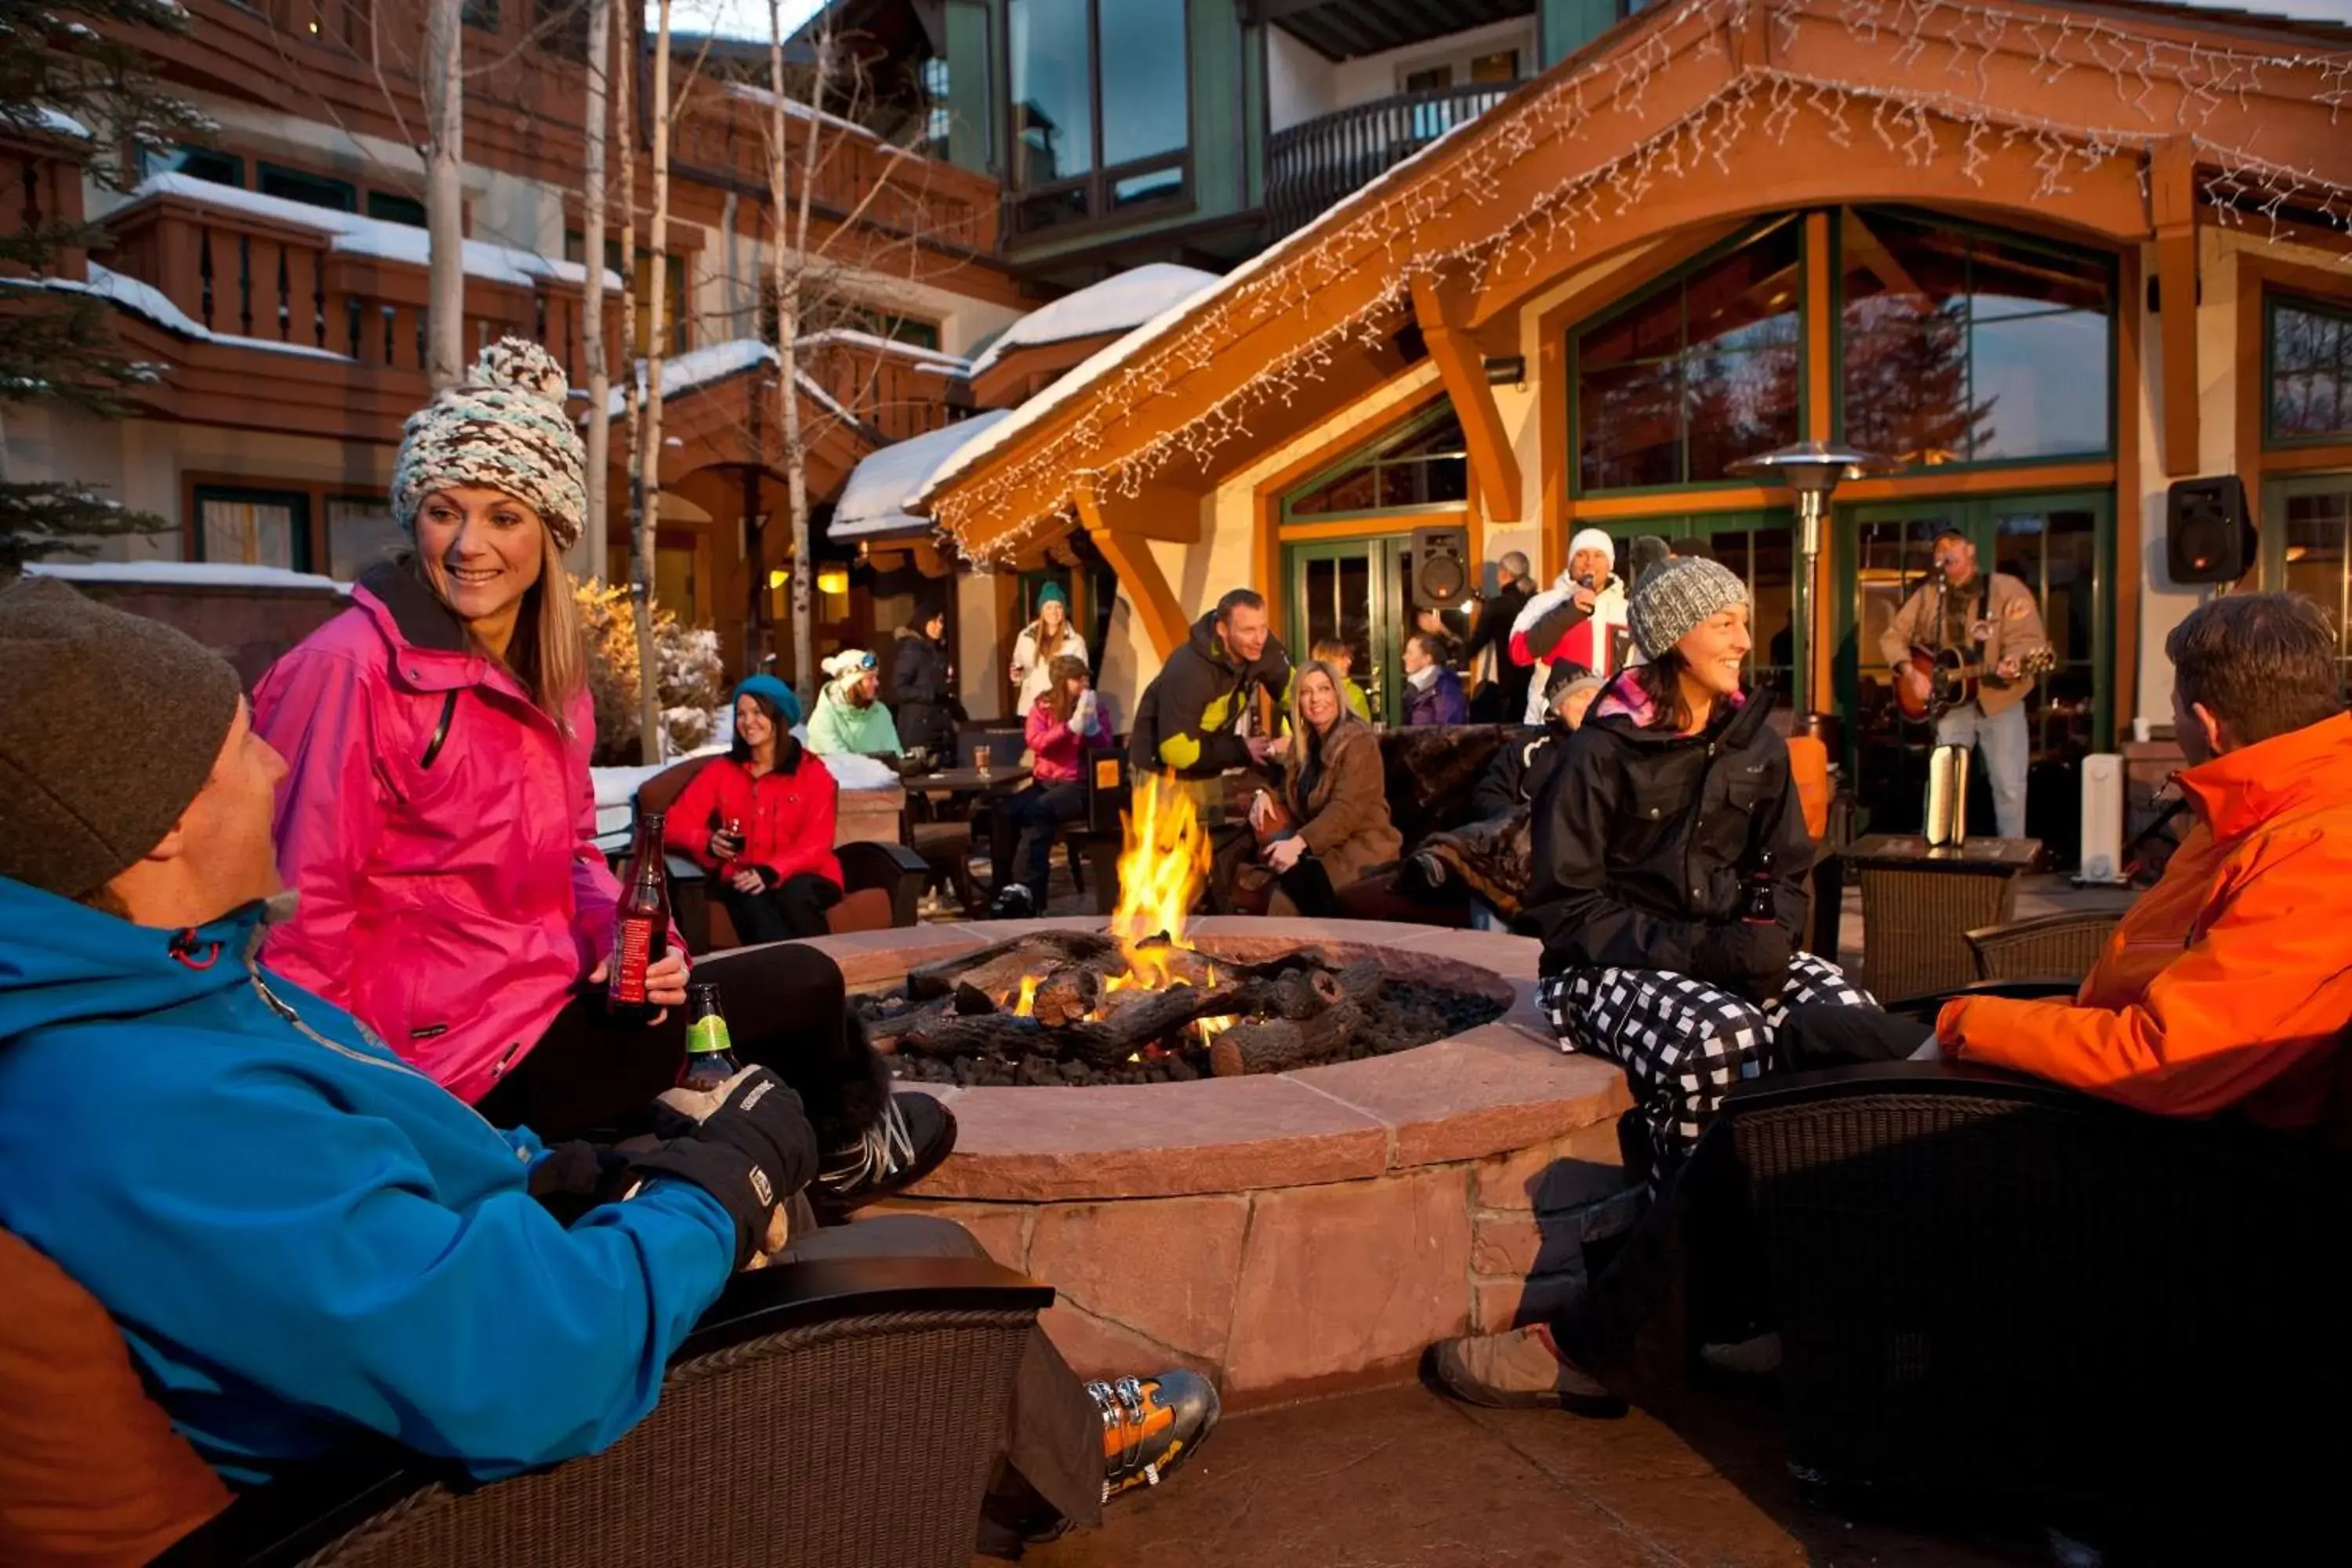 People in Lodge at Vail, A RockResort